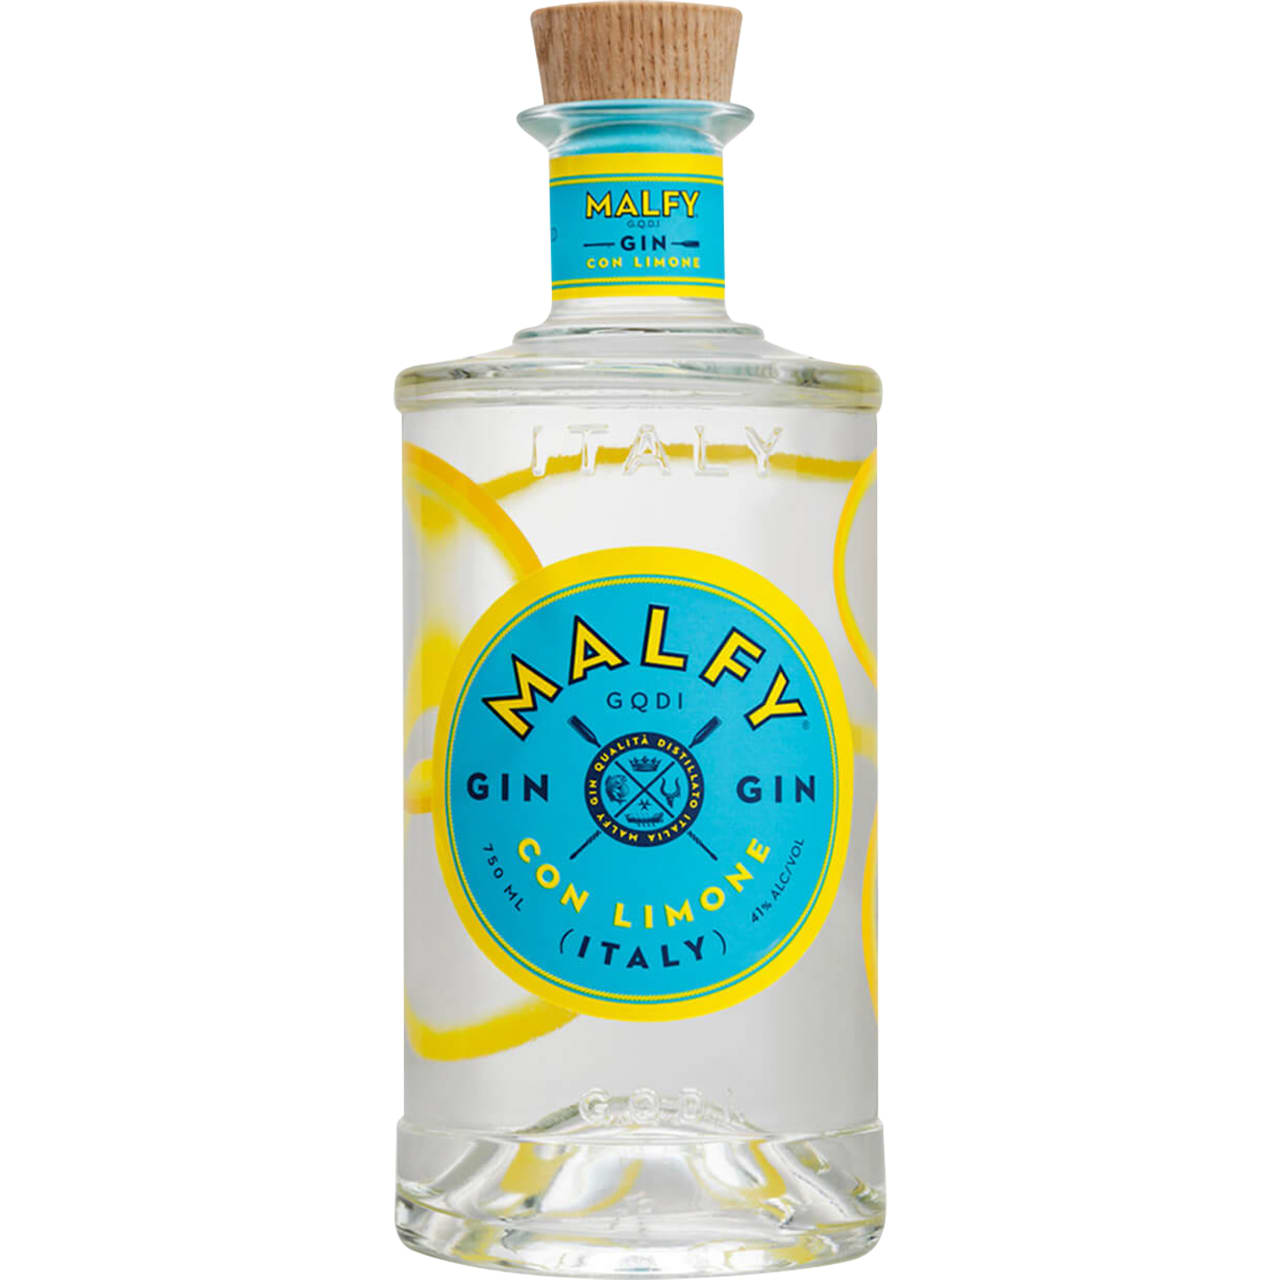 A ripe lemon scented gin with background aromas of juniper and coriander.